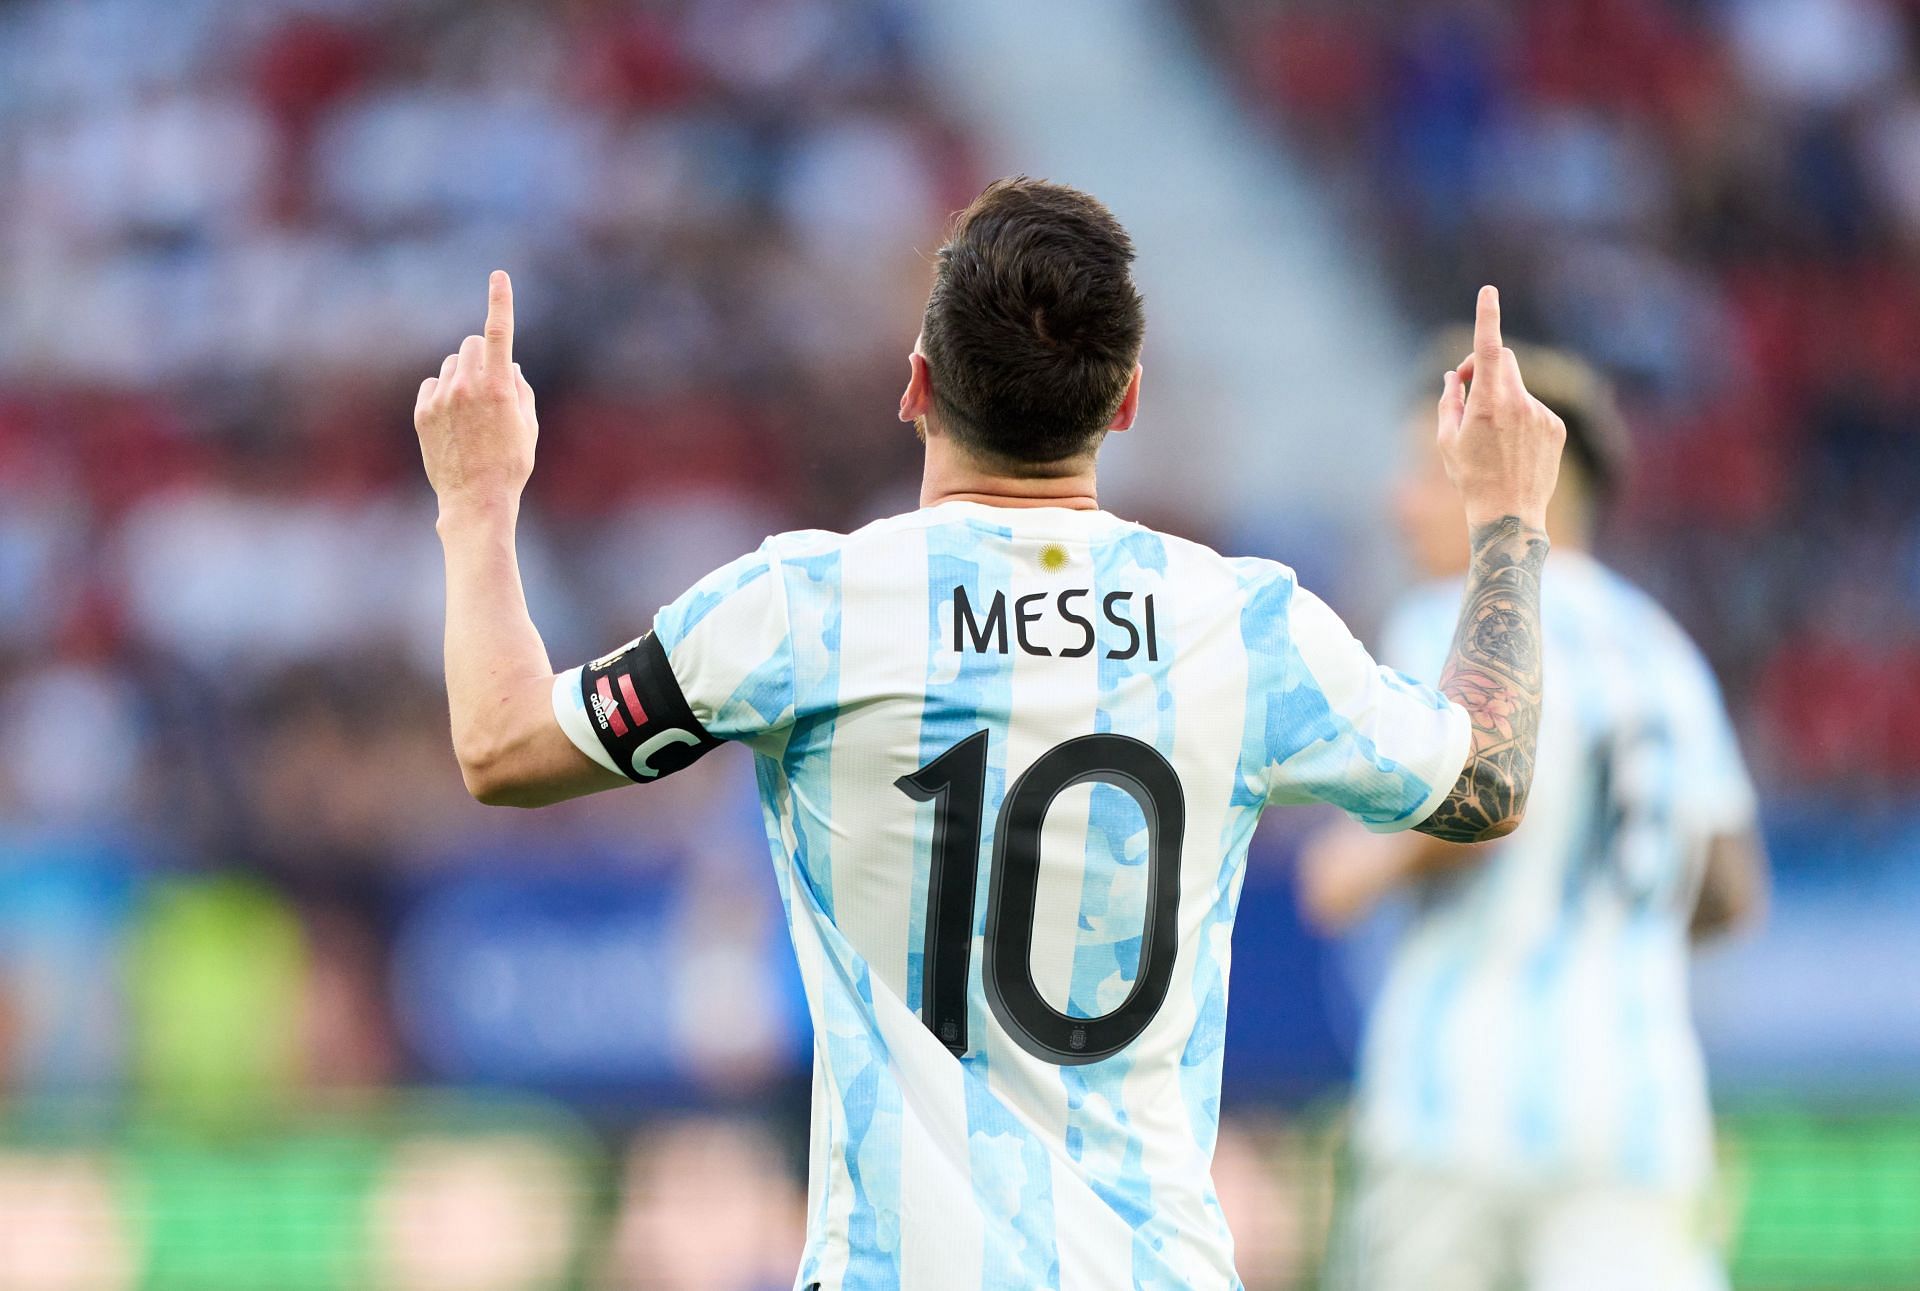 Argentina fans will be hoping for Lionel Messi to inspire them to an elusive FIFA World Cup trophy in Qatar